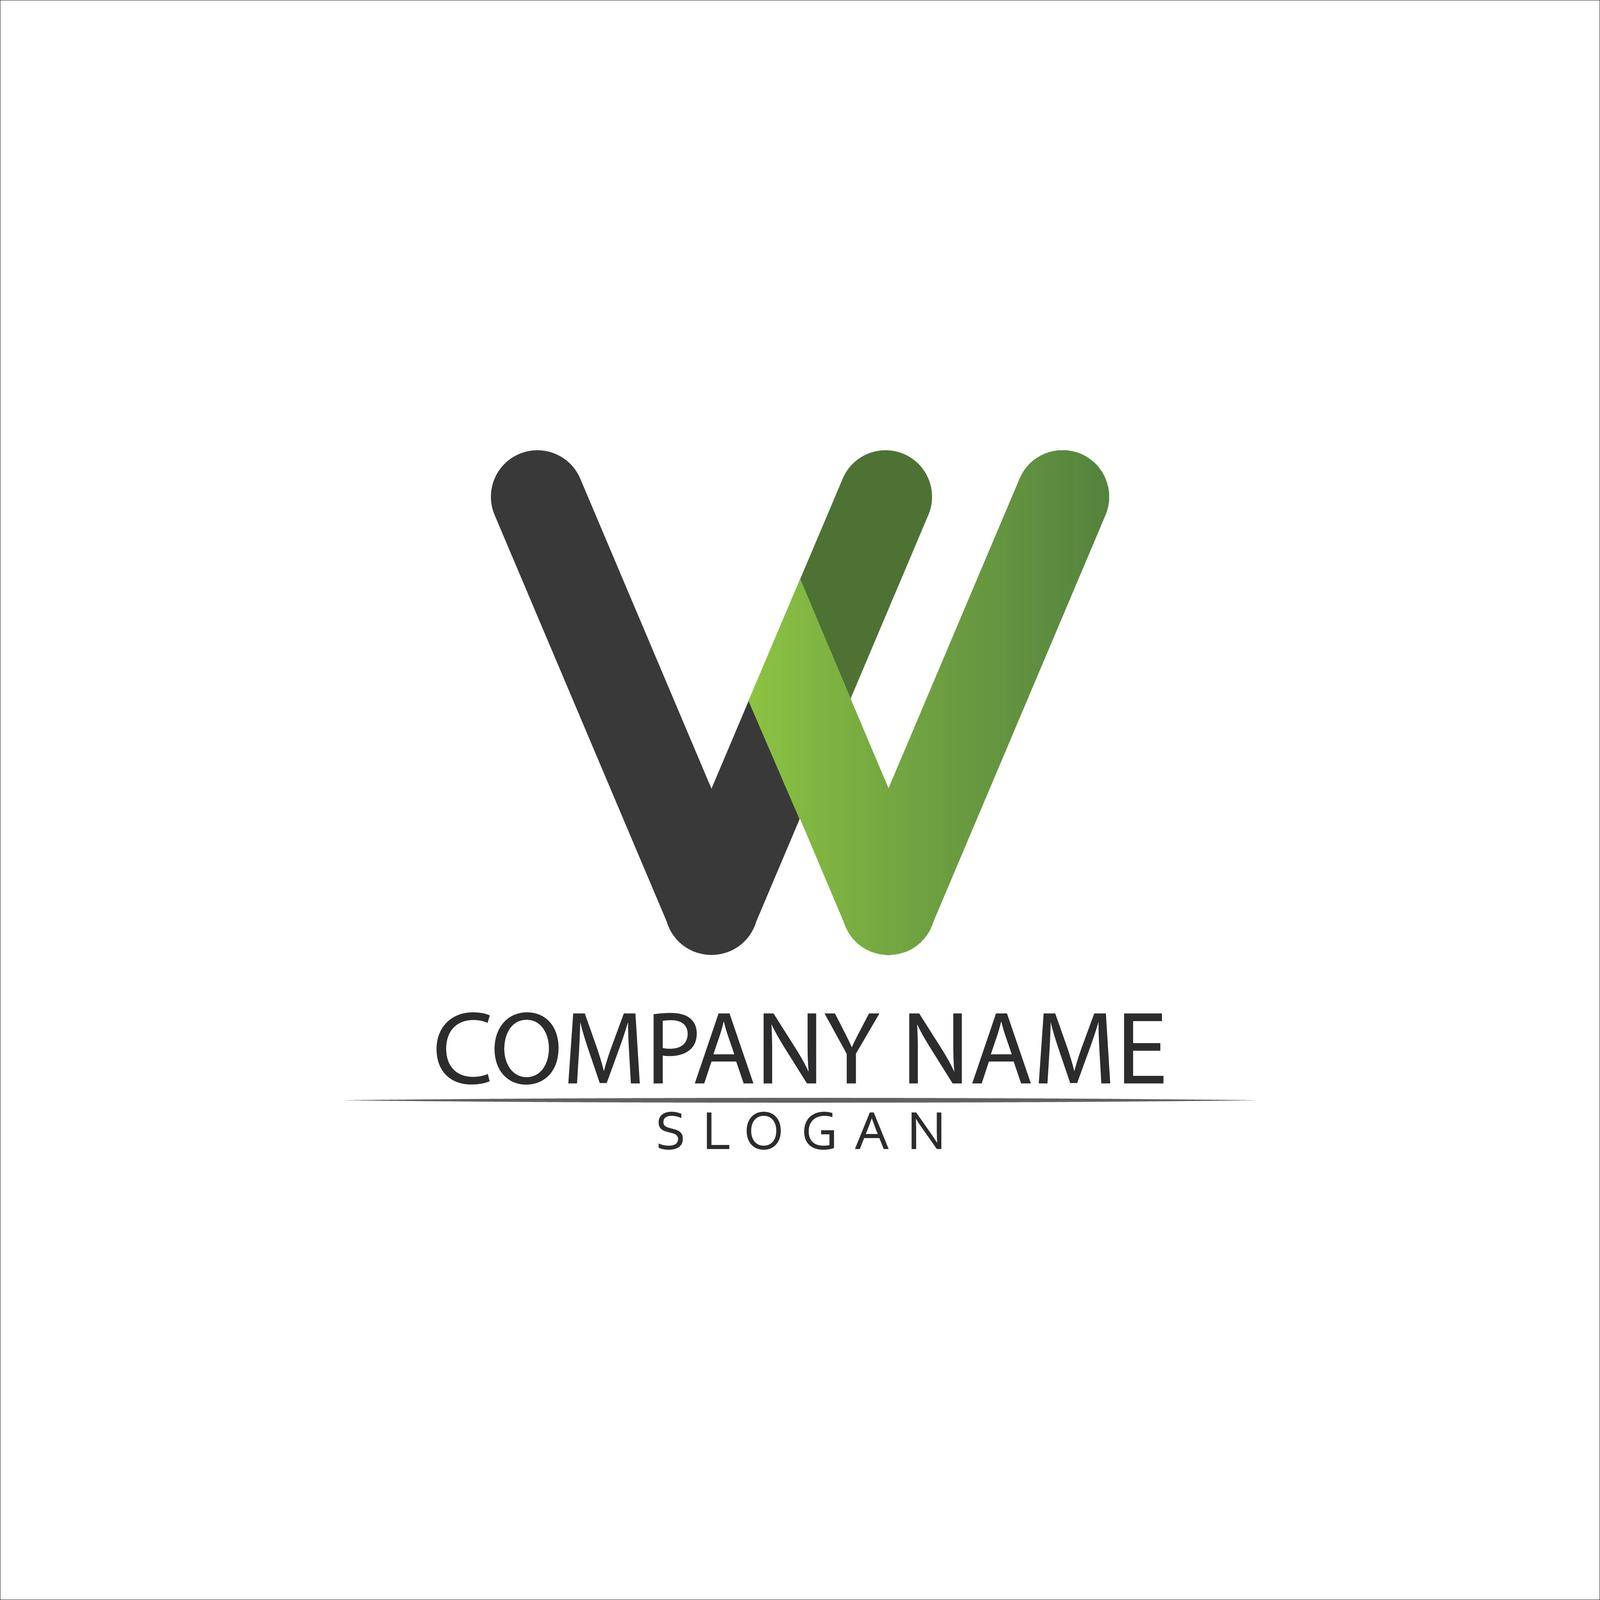 W Letter Logo Template by Anggasaputro